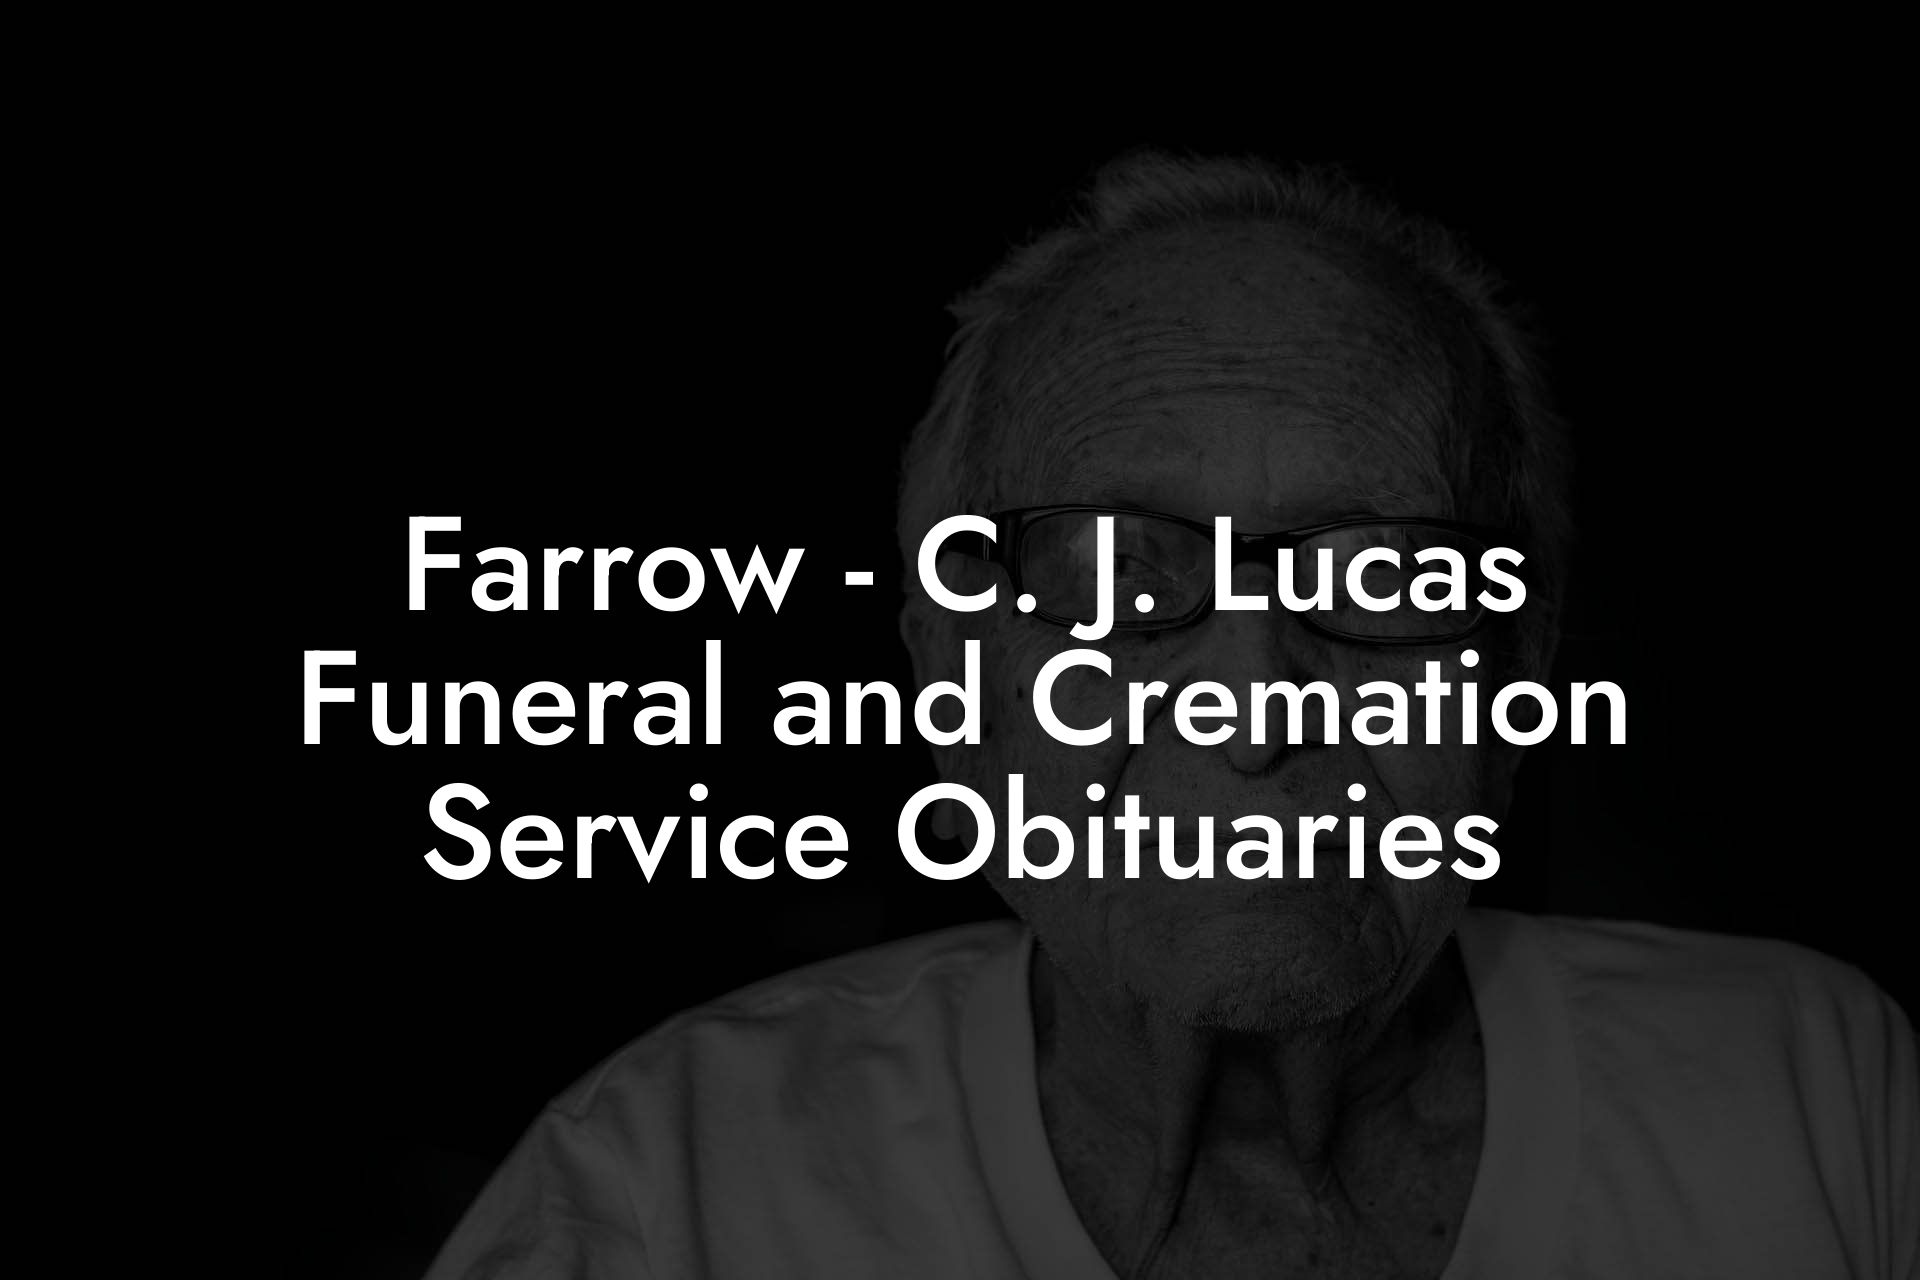 Farrow - C. J. Lucas Funeral and Cremation Service Obituaries